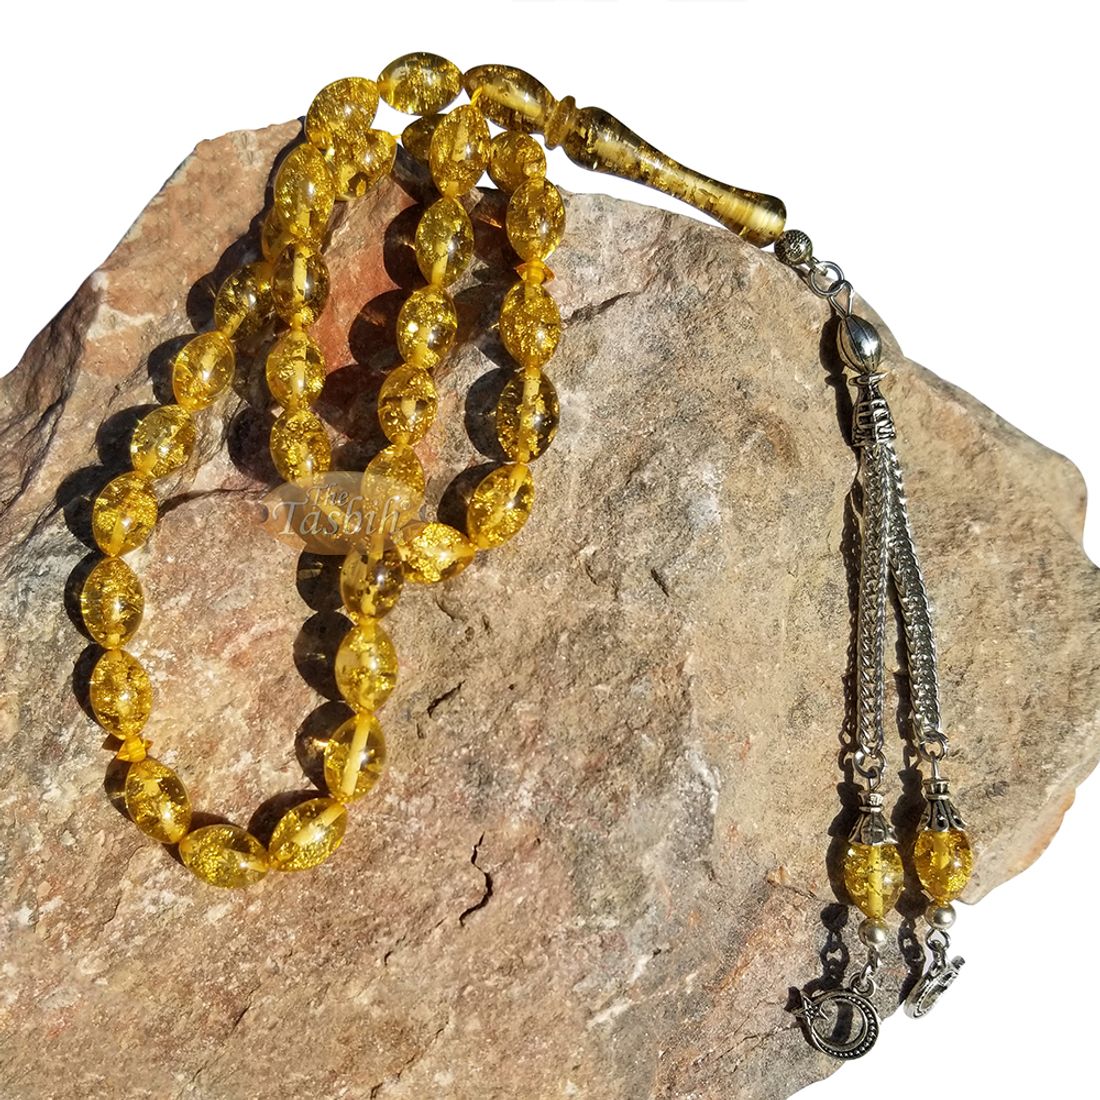 Small Acrylic Oval 33-bead Tasbih Gold-tone Leaf Flakes Accented with 2 Silver Knot Charms on Foxtail Chains